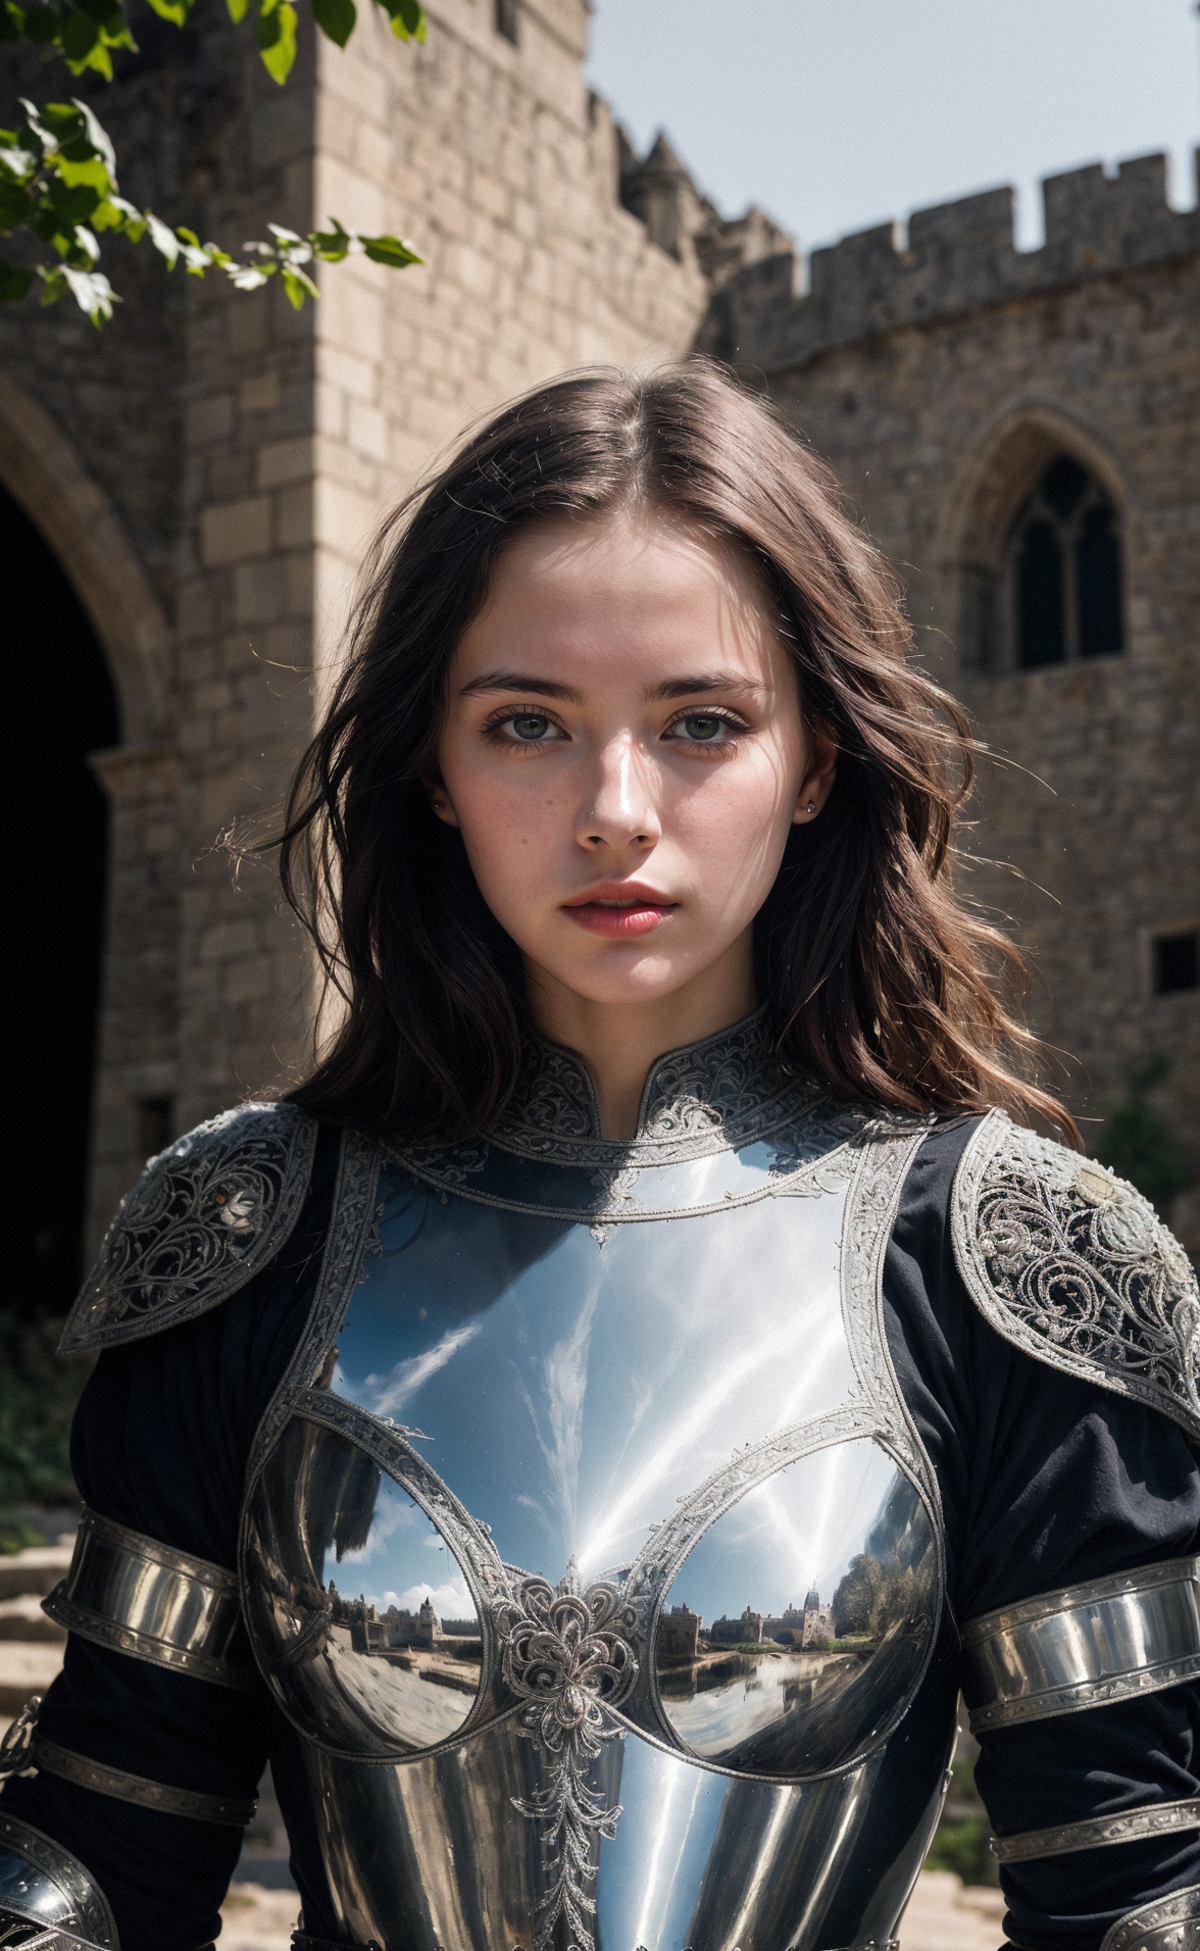 A young woman in a medieval-style armor, complete with a chainmail dress, looking directly into the camera.